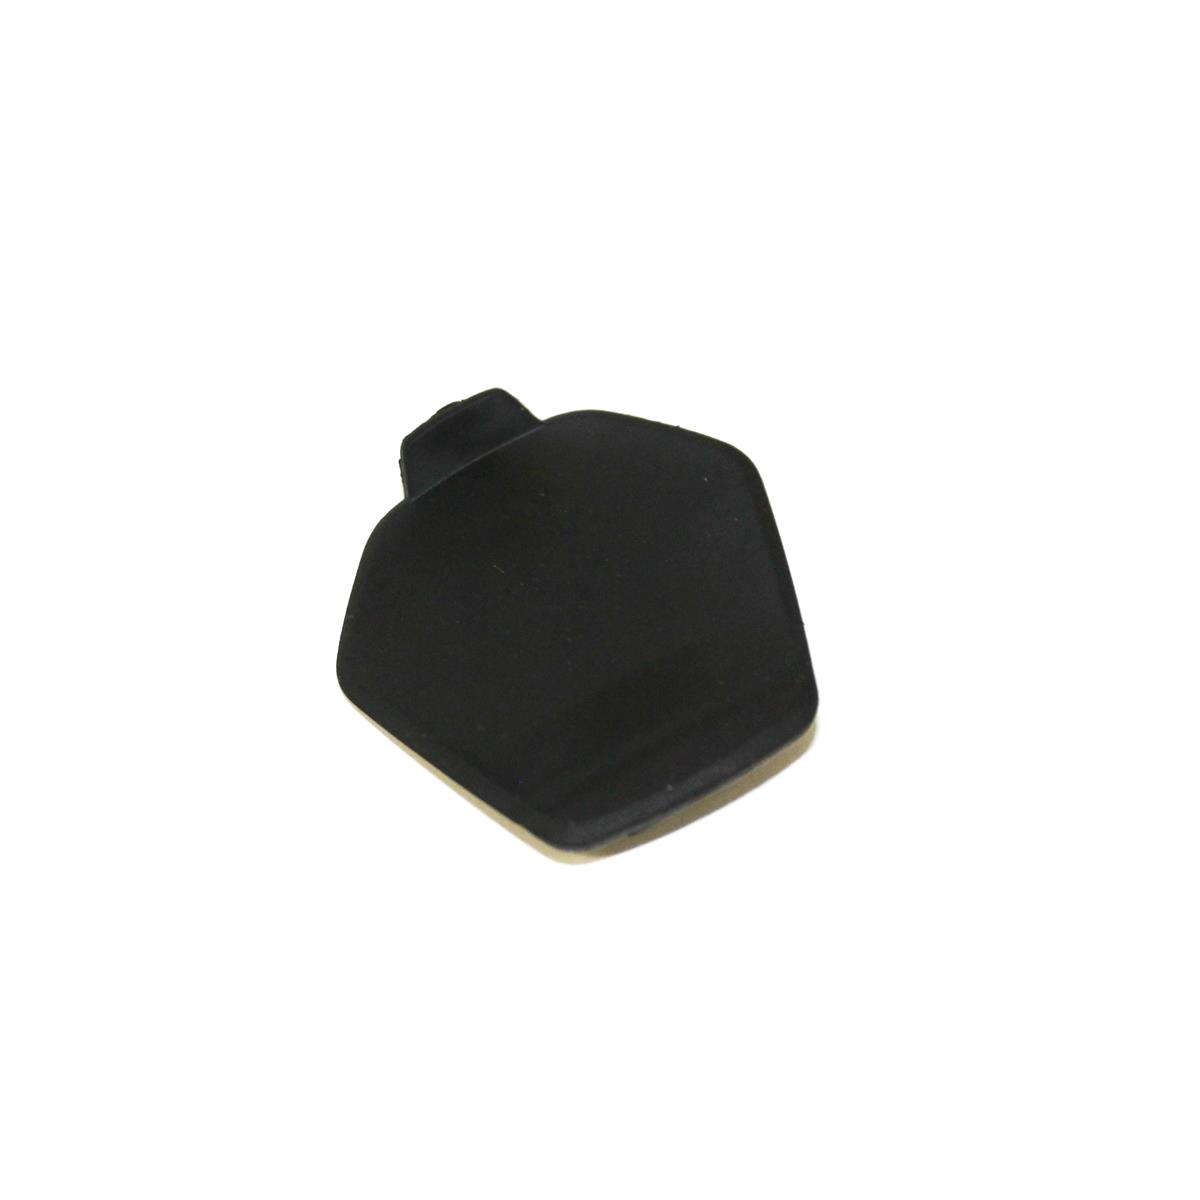 Rubber cover for charging port for Thron2, Jam2 and Sam2 with Bosch engine